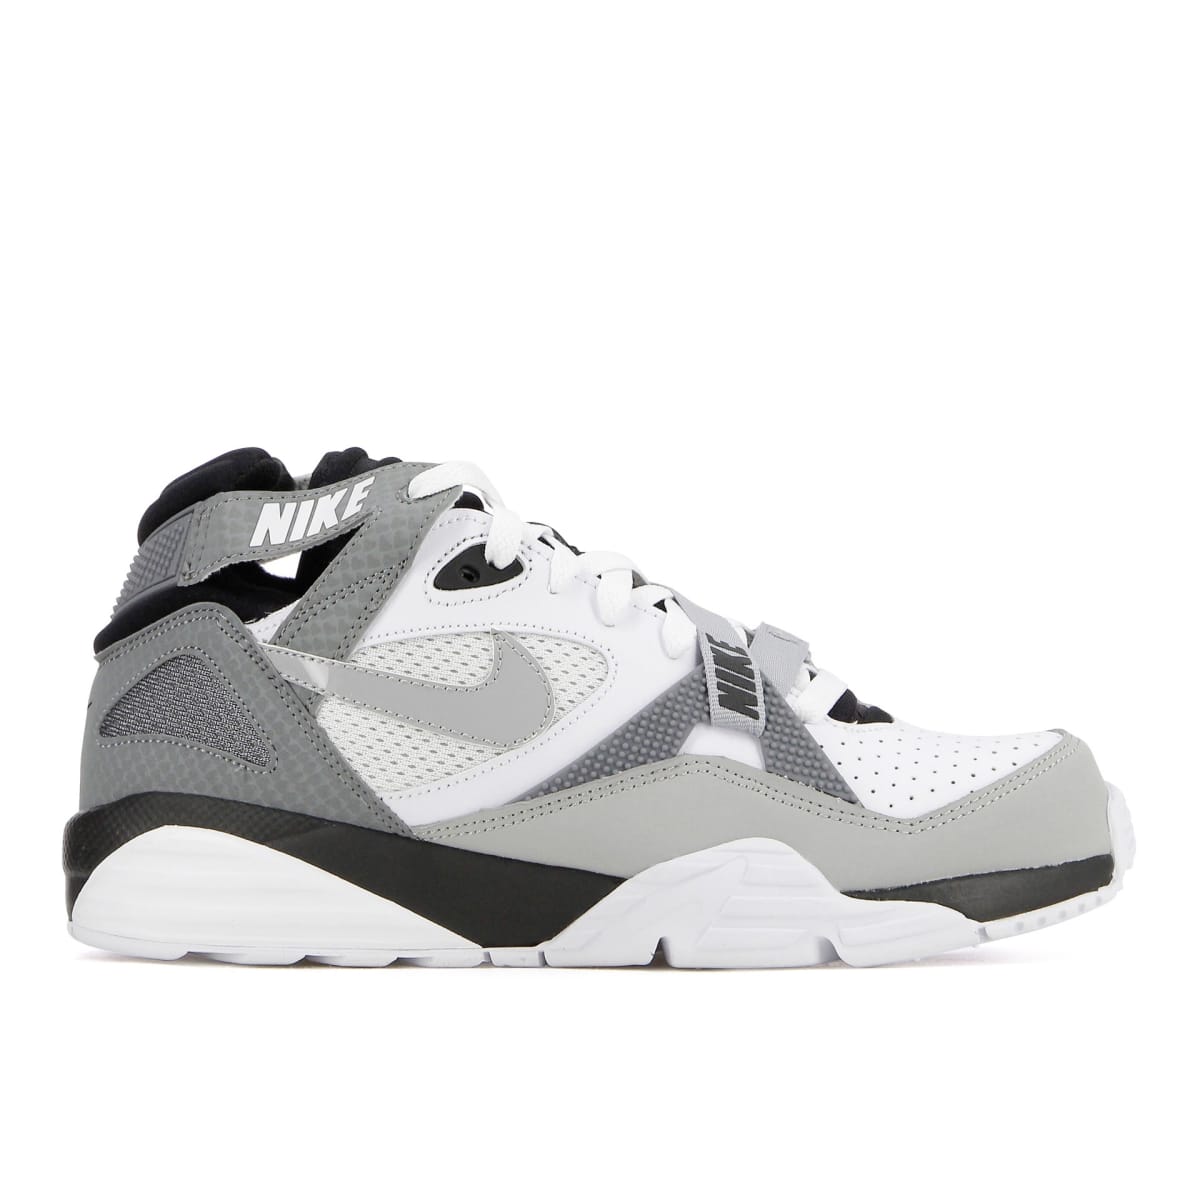 Nike Air Trainer Max 91 | Nike | Sole Collector